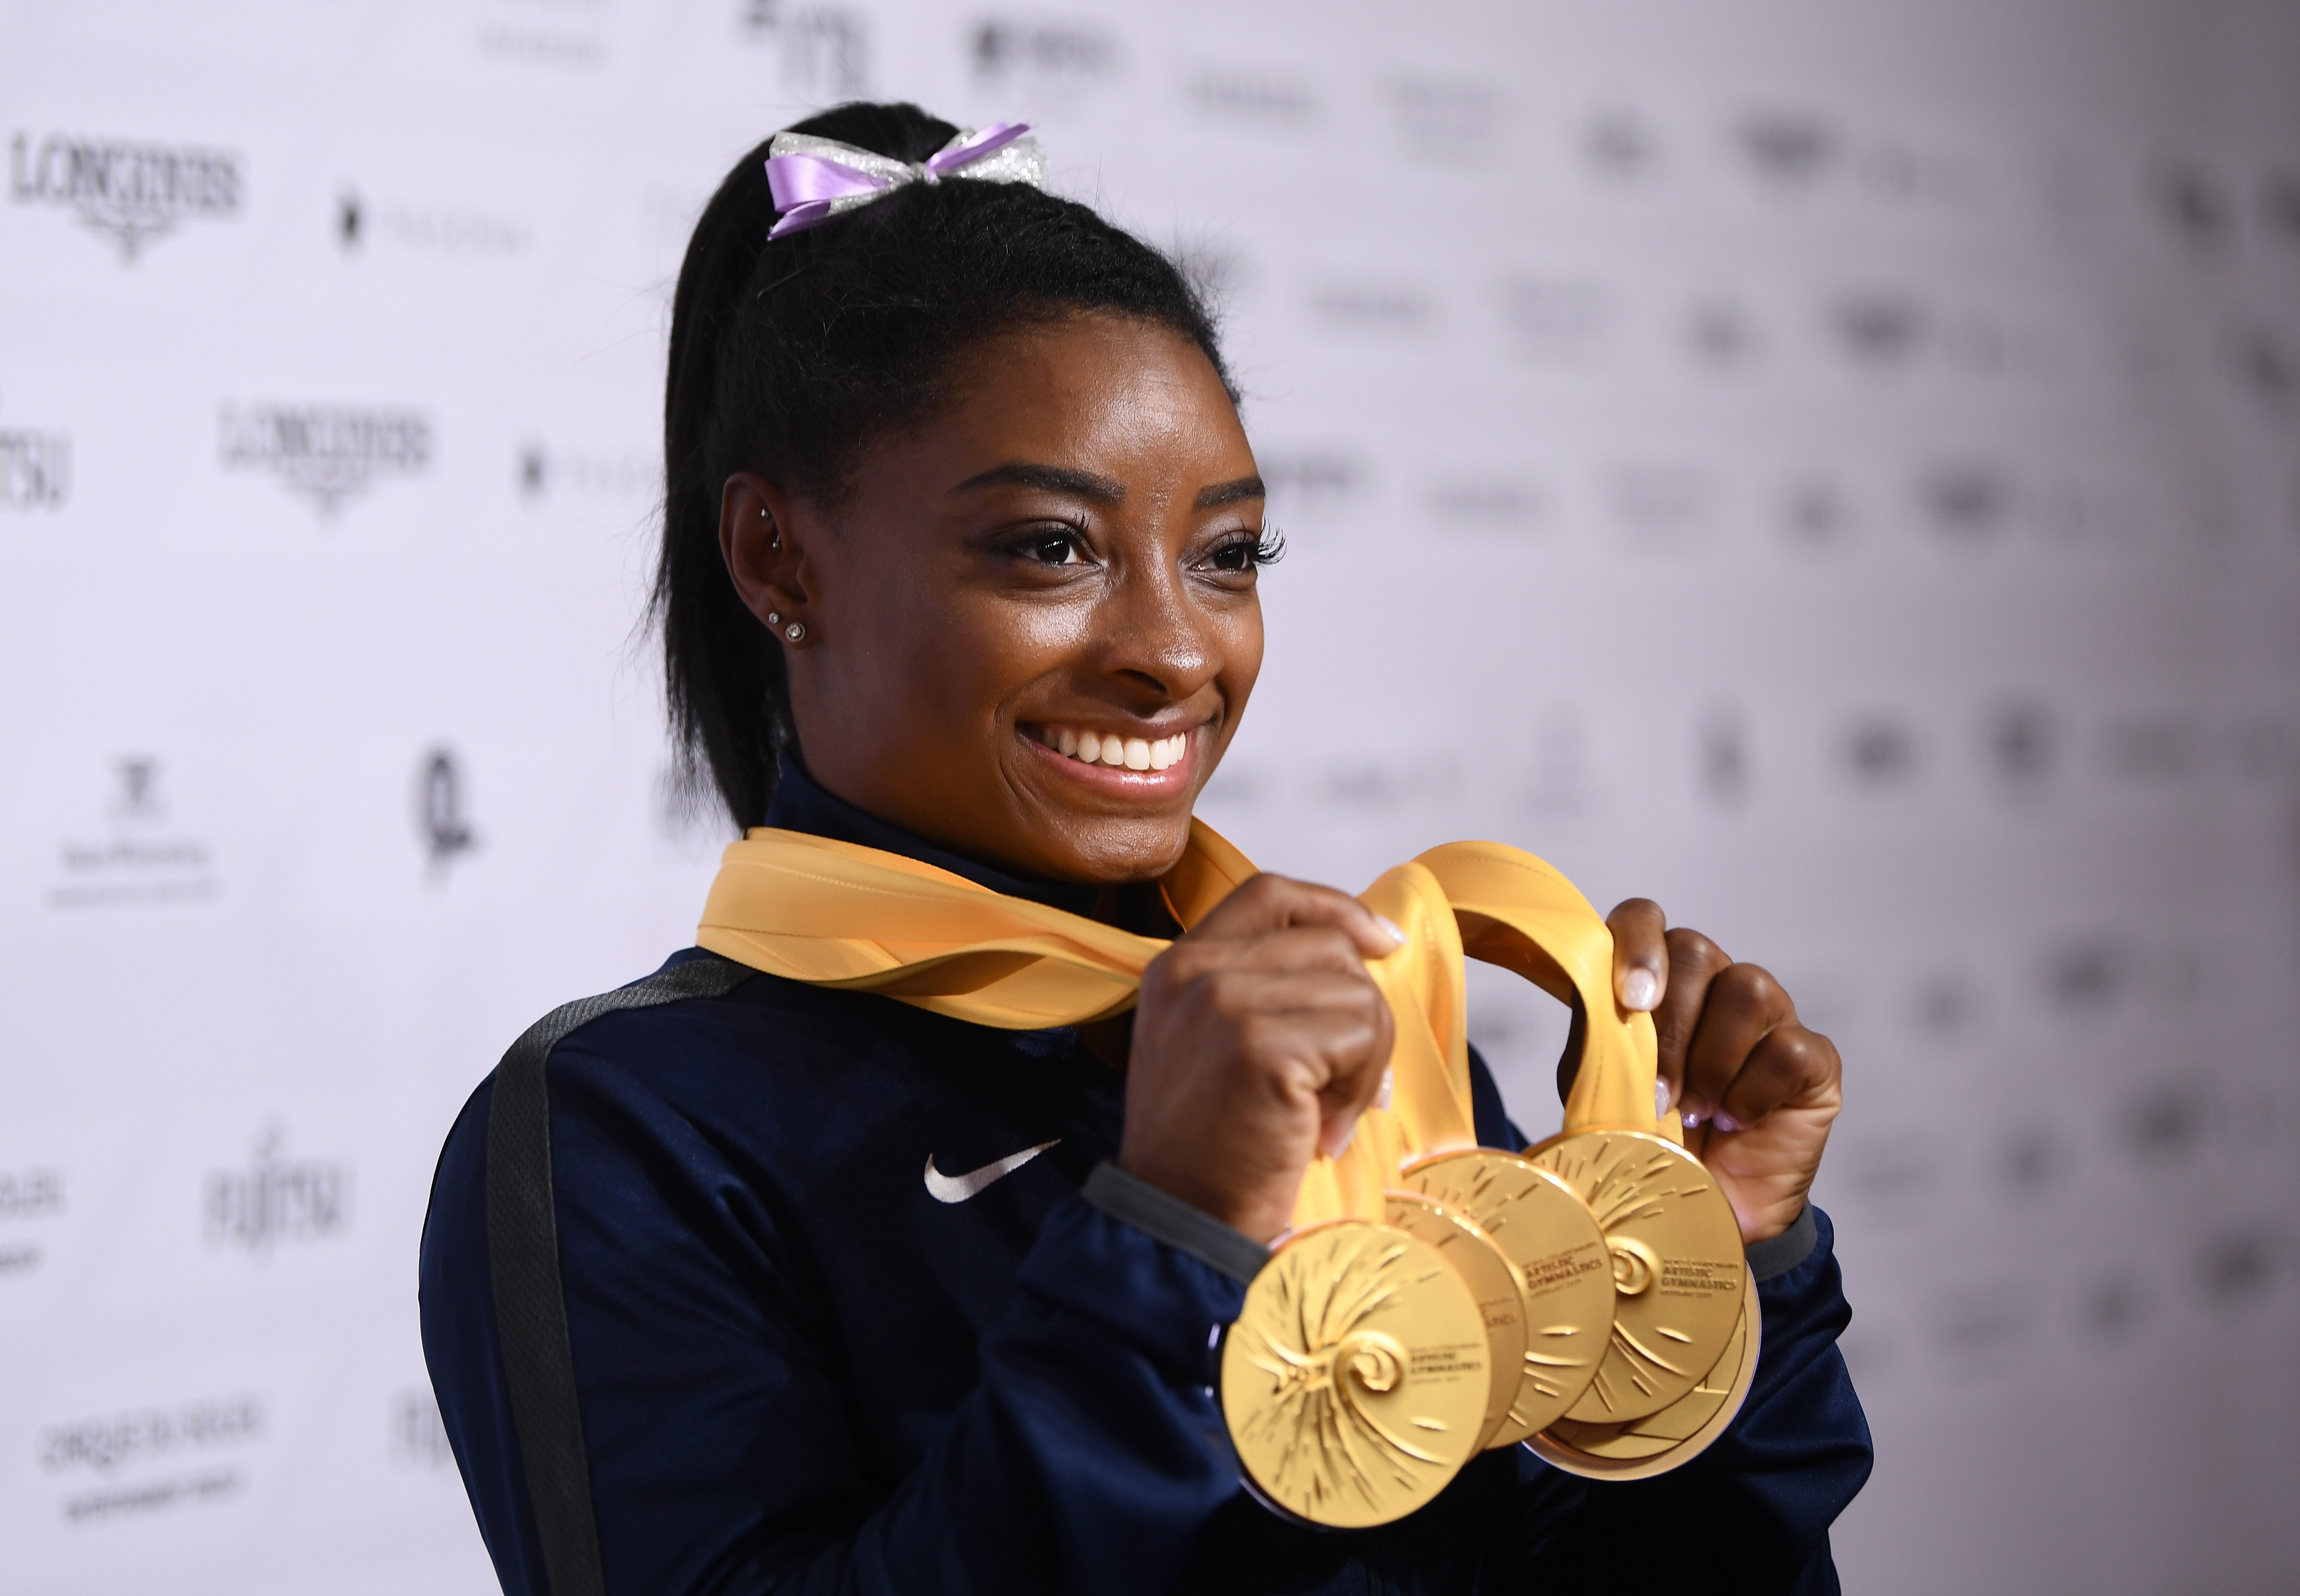 Simone Biles poses with her Medals at the FIG Artistic Gymnastics World Championships on Oct. 13, 2019 in Stuttgart, Germany | Photo: Getty Images